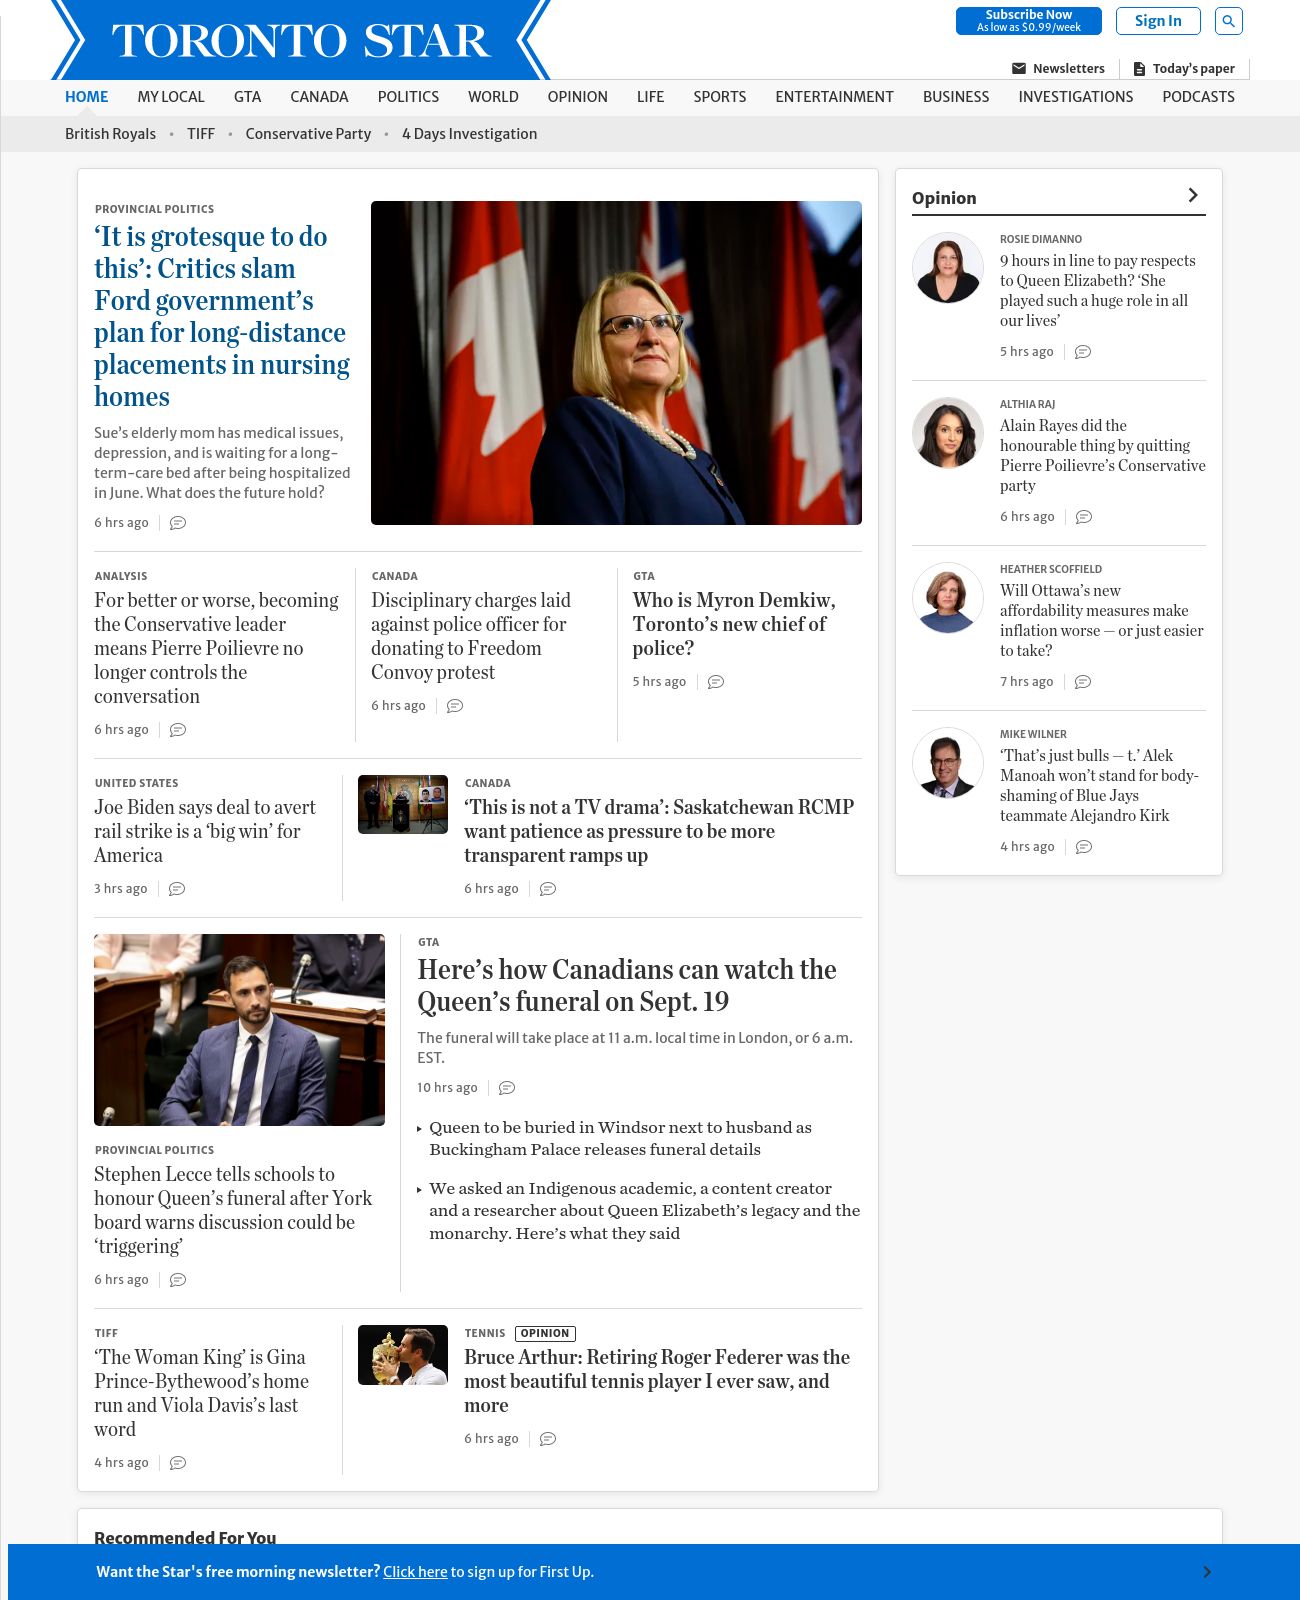 Toronto Star at 2022-09-16 01:35:26-04:00 local time